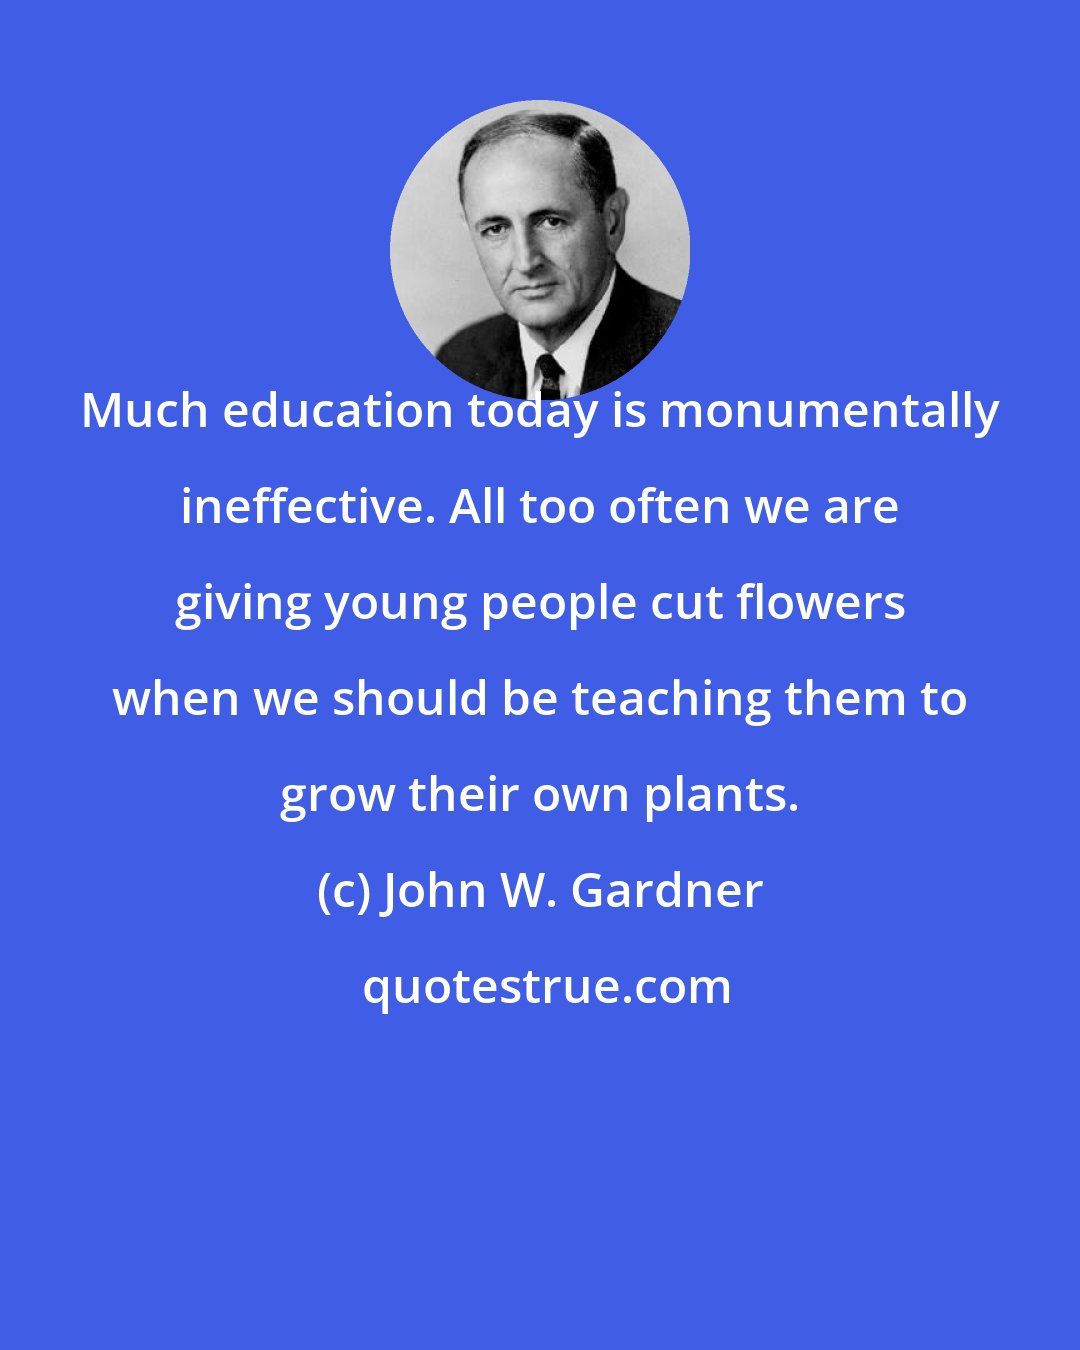 John W. Gardner: Much education today is monumentally ineffective. All too often we are giving young people cut flowers when we should be teaching them to grow their own plants.